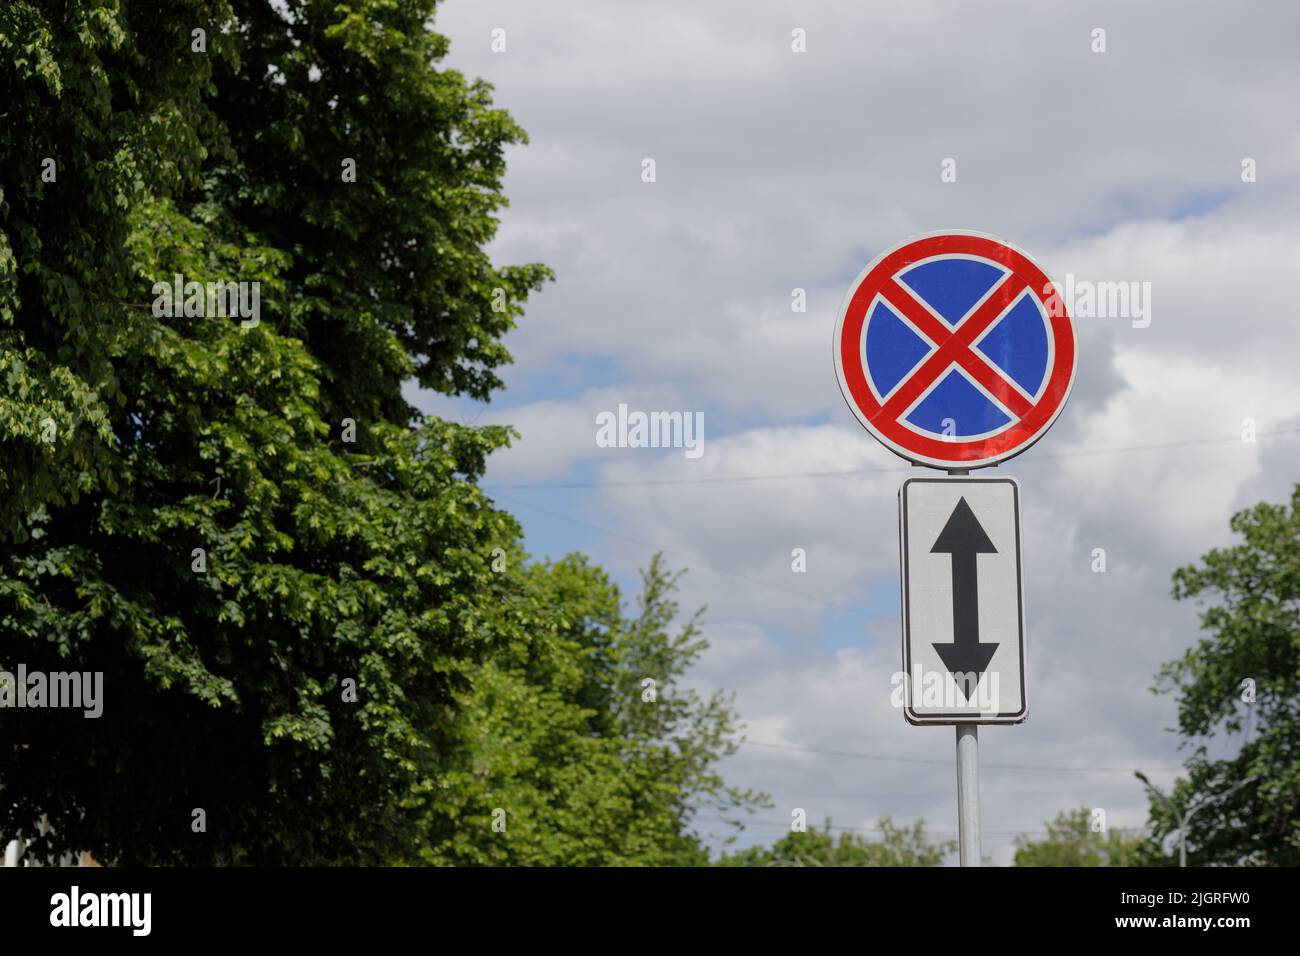 A European road sign indicating that stopping and parking is prohibited in front of and outside the sign. Blue sky and nature in the background. High Stock Photo